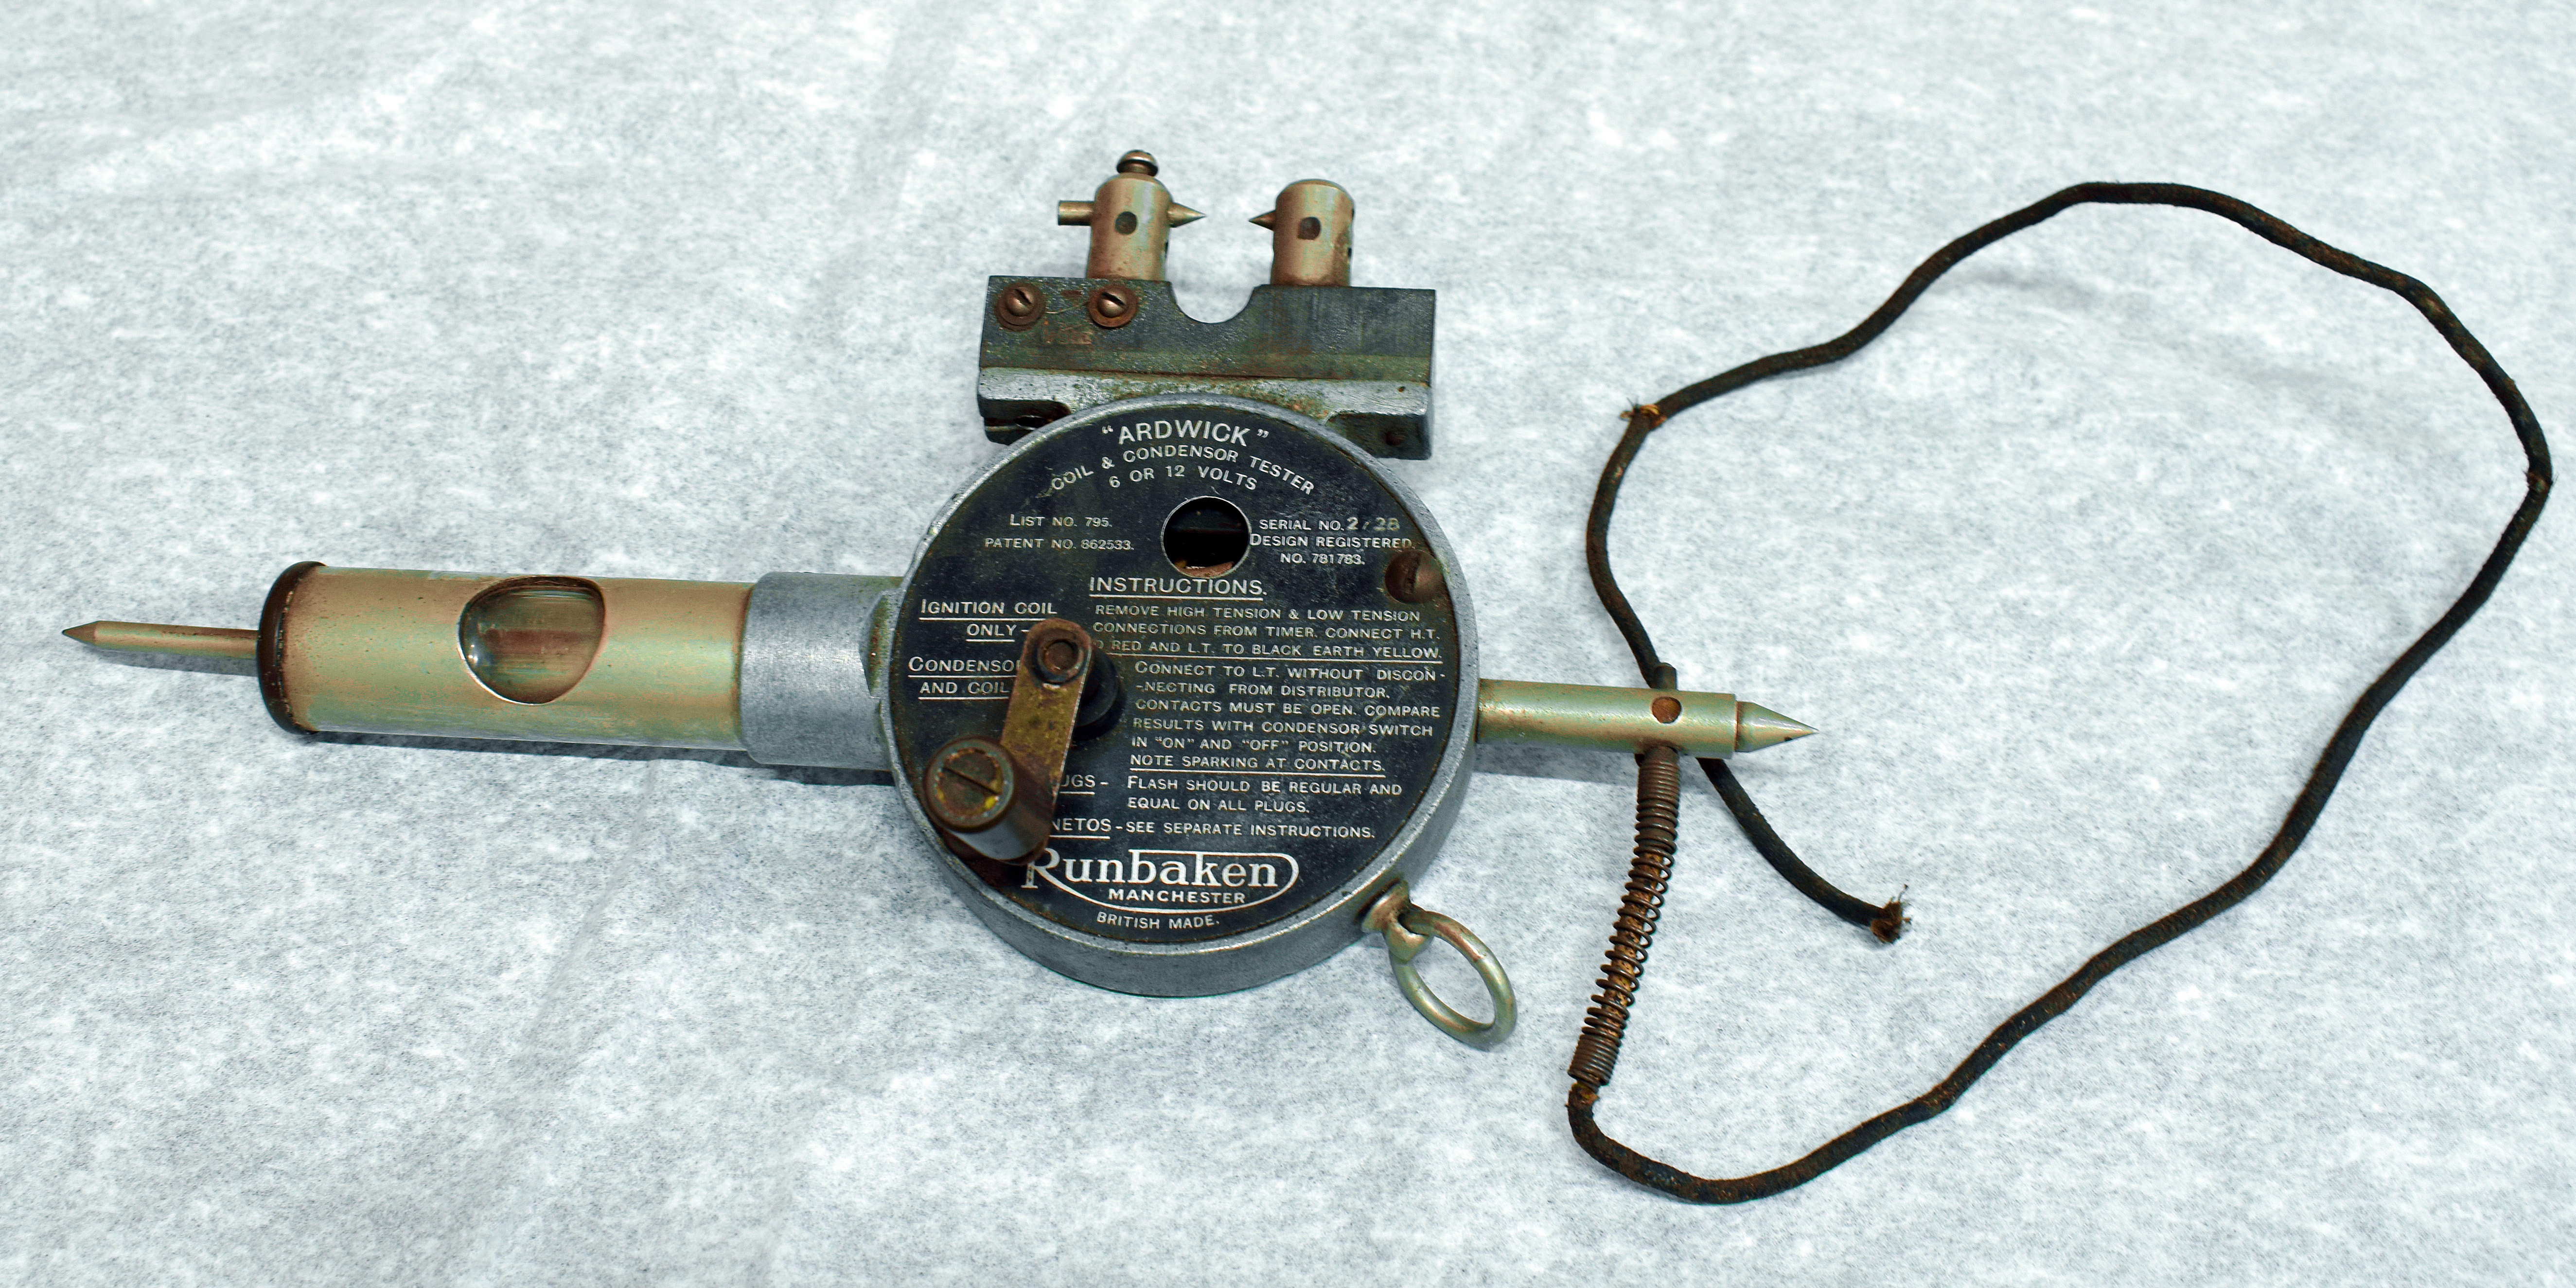 An early electrical testing device